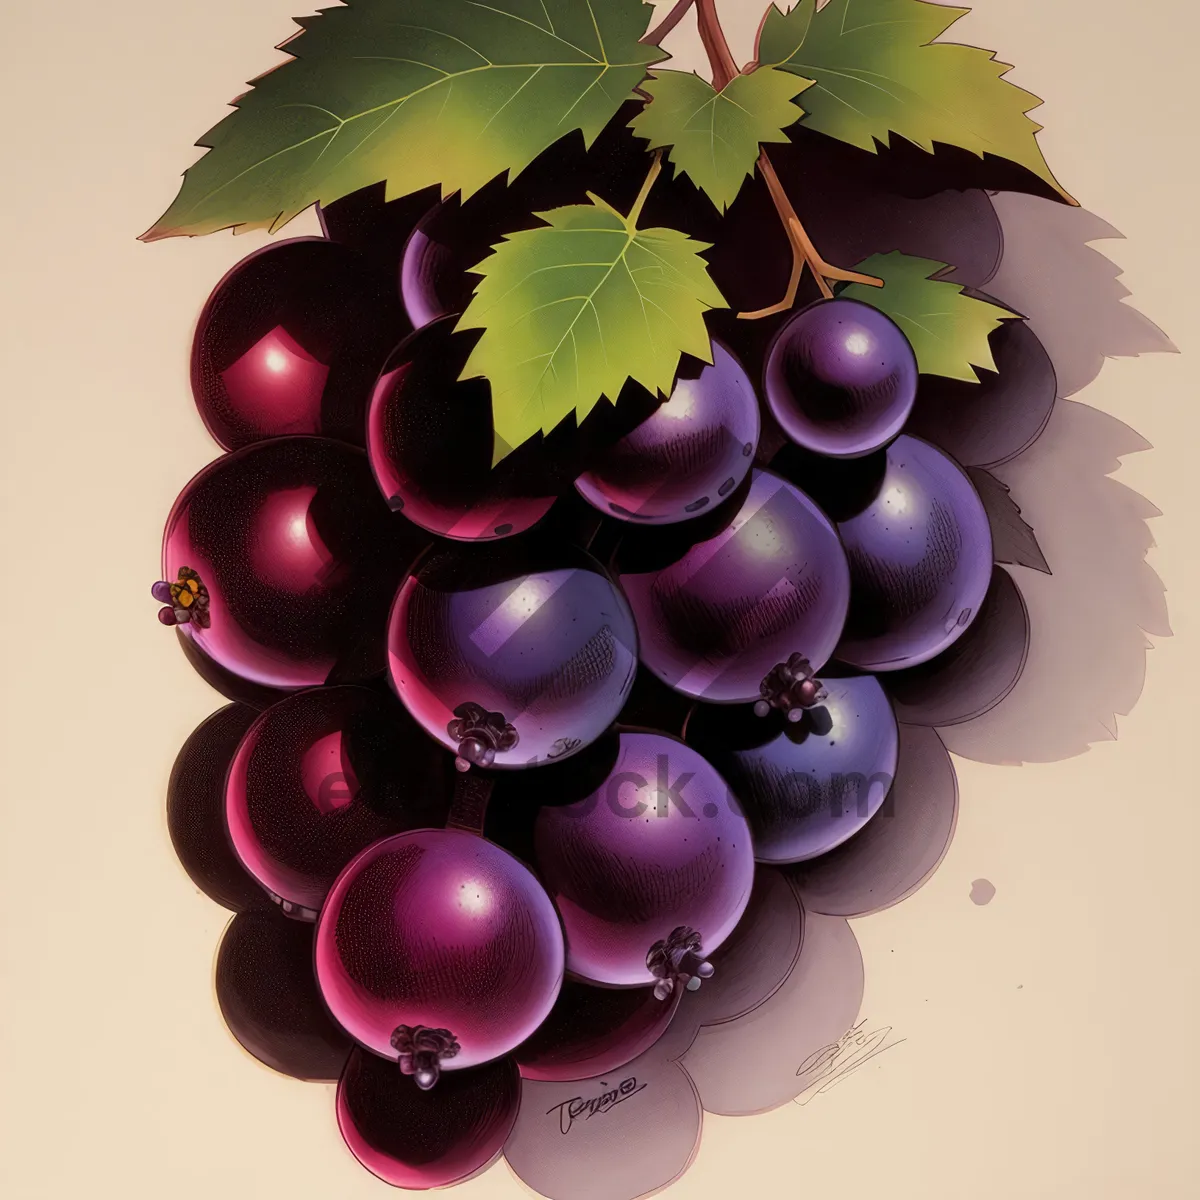 Picture of Winter Celebration: Juicy Ripe Grapes in Vineyard